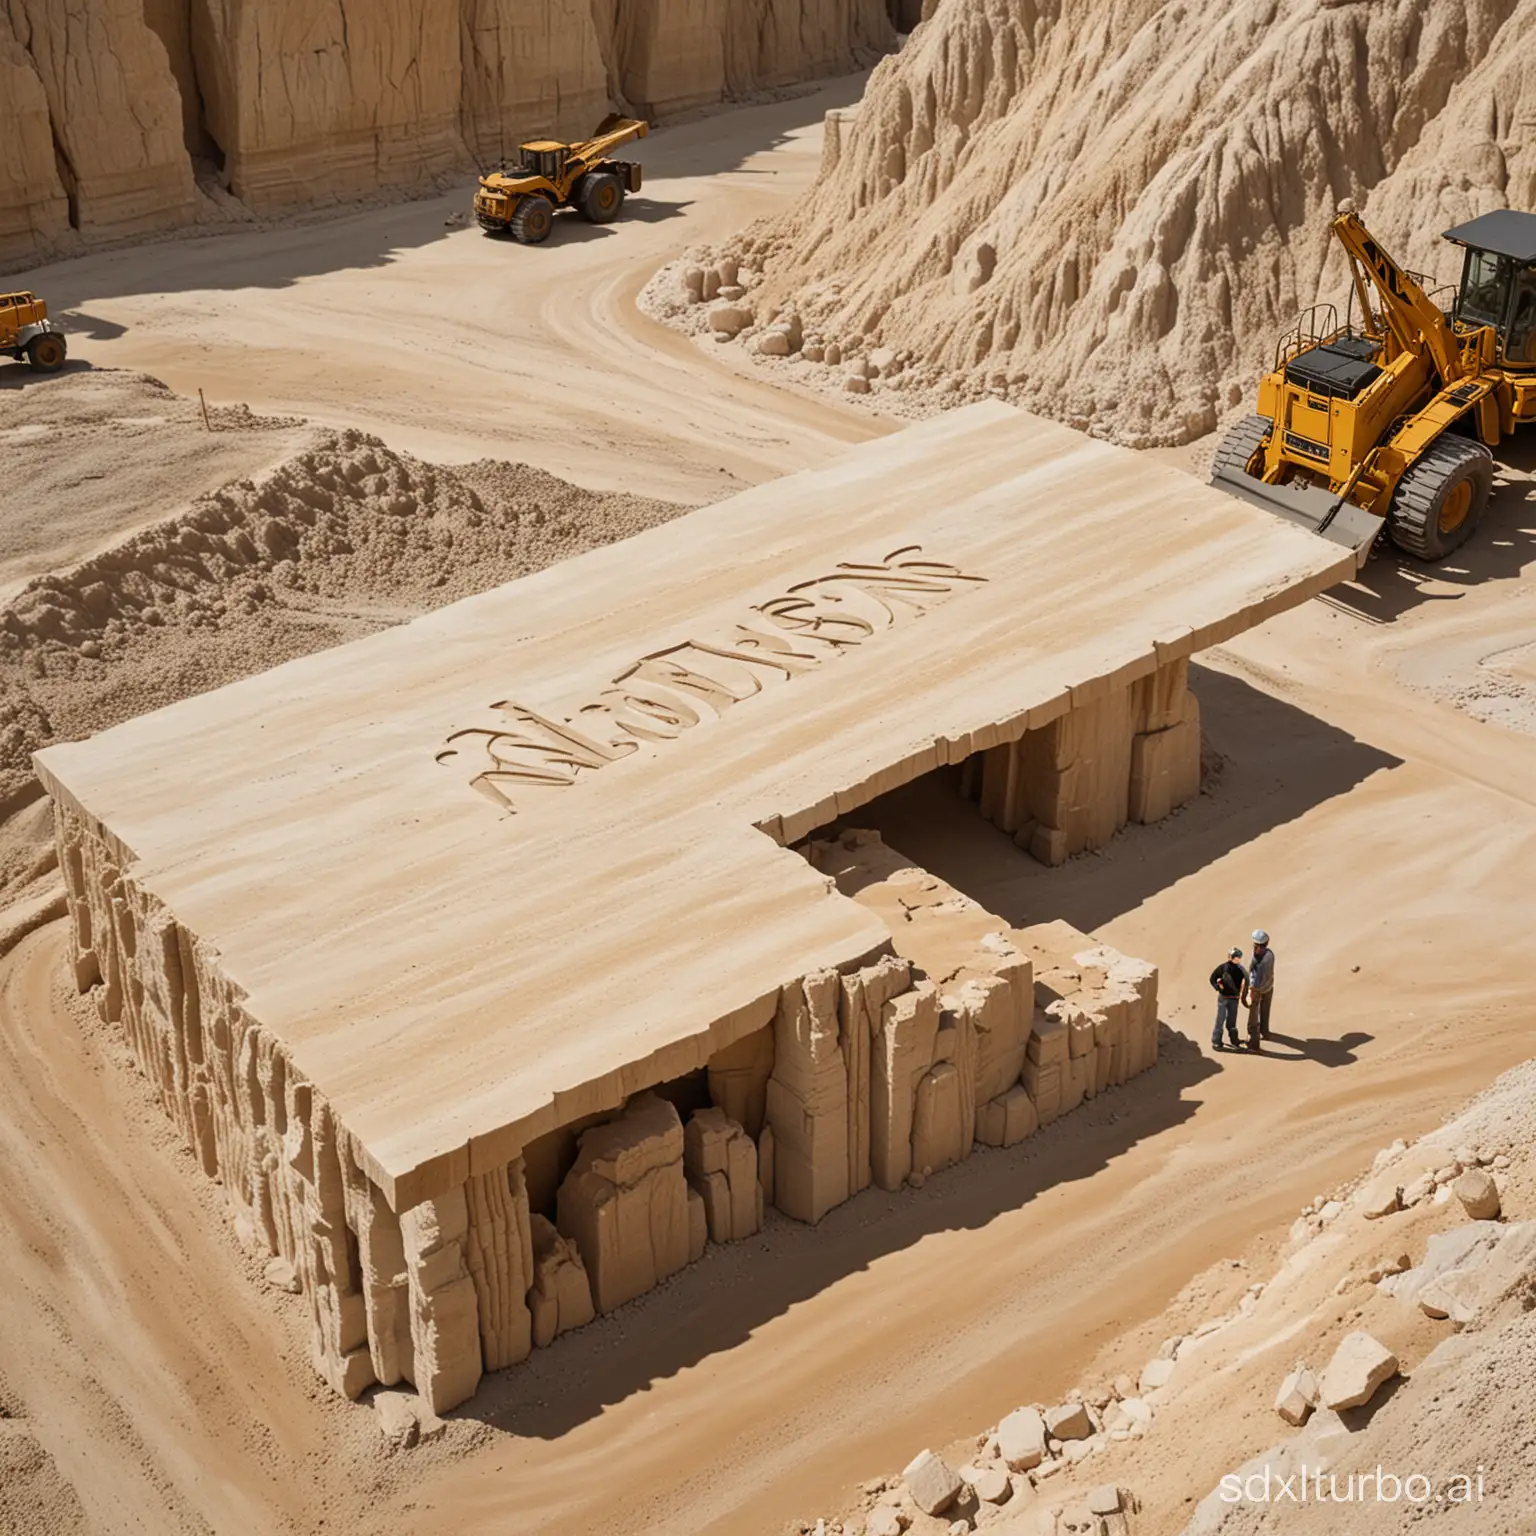 
A highly realistic depiction of a travertine stone quarry, resembling an actual mining site. The scene captures the rugged, industrial environment of the quarry with heavy machinery actively operating and large blocks of travertine stone prominently displaying their unique beige textures. In the foreground, a craftsman, assisted by a woman who admires his work, meticulously hand-carves a piece of travertine into a sophisticated table with the letter 'N' engraved on it. This image emphasizes the authentic look and feel of a working stone quarry."
